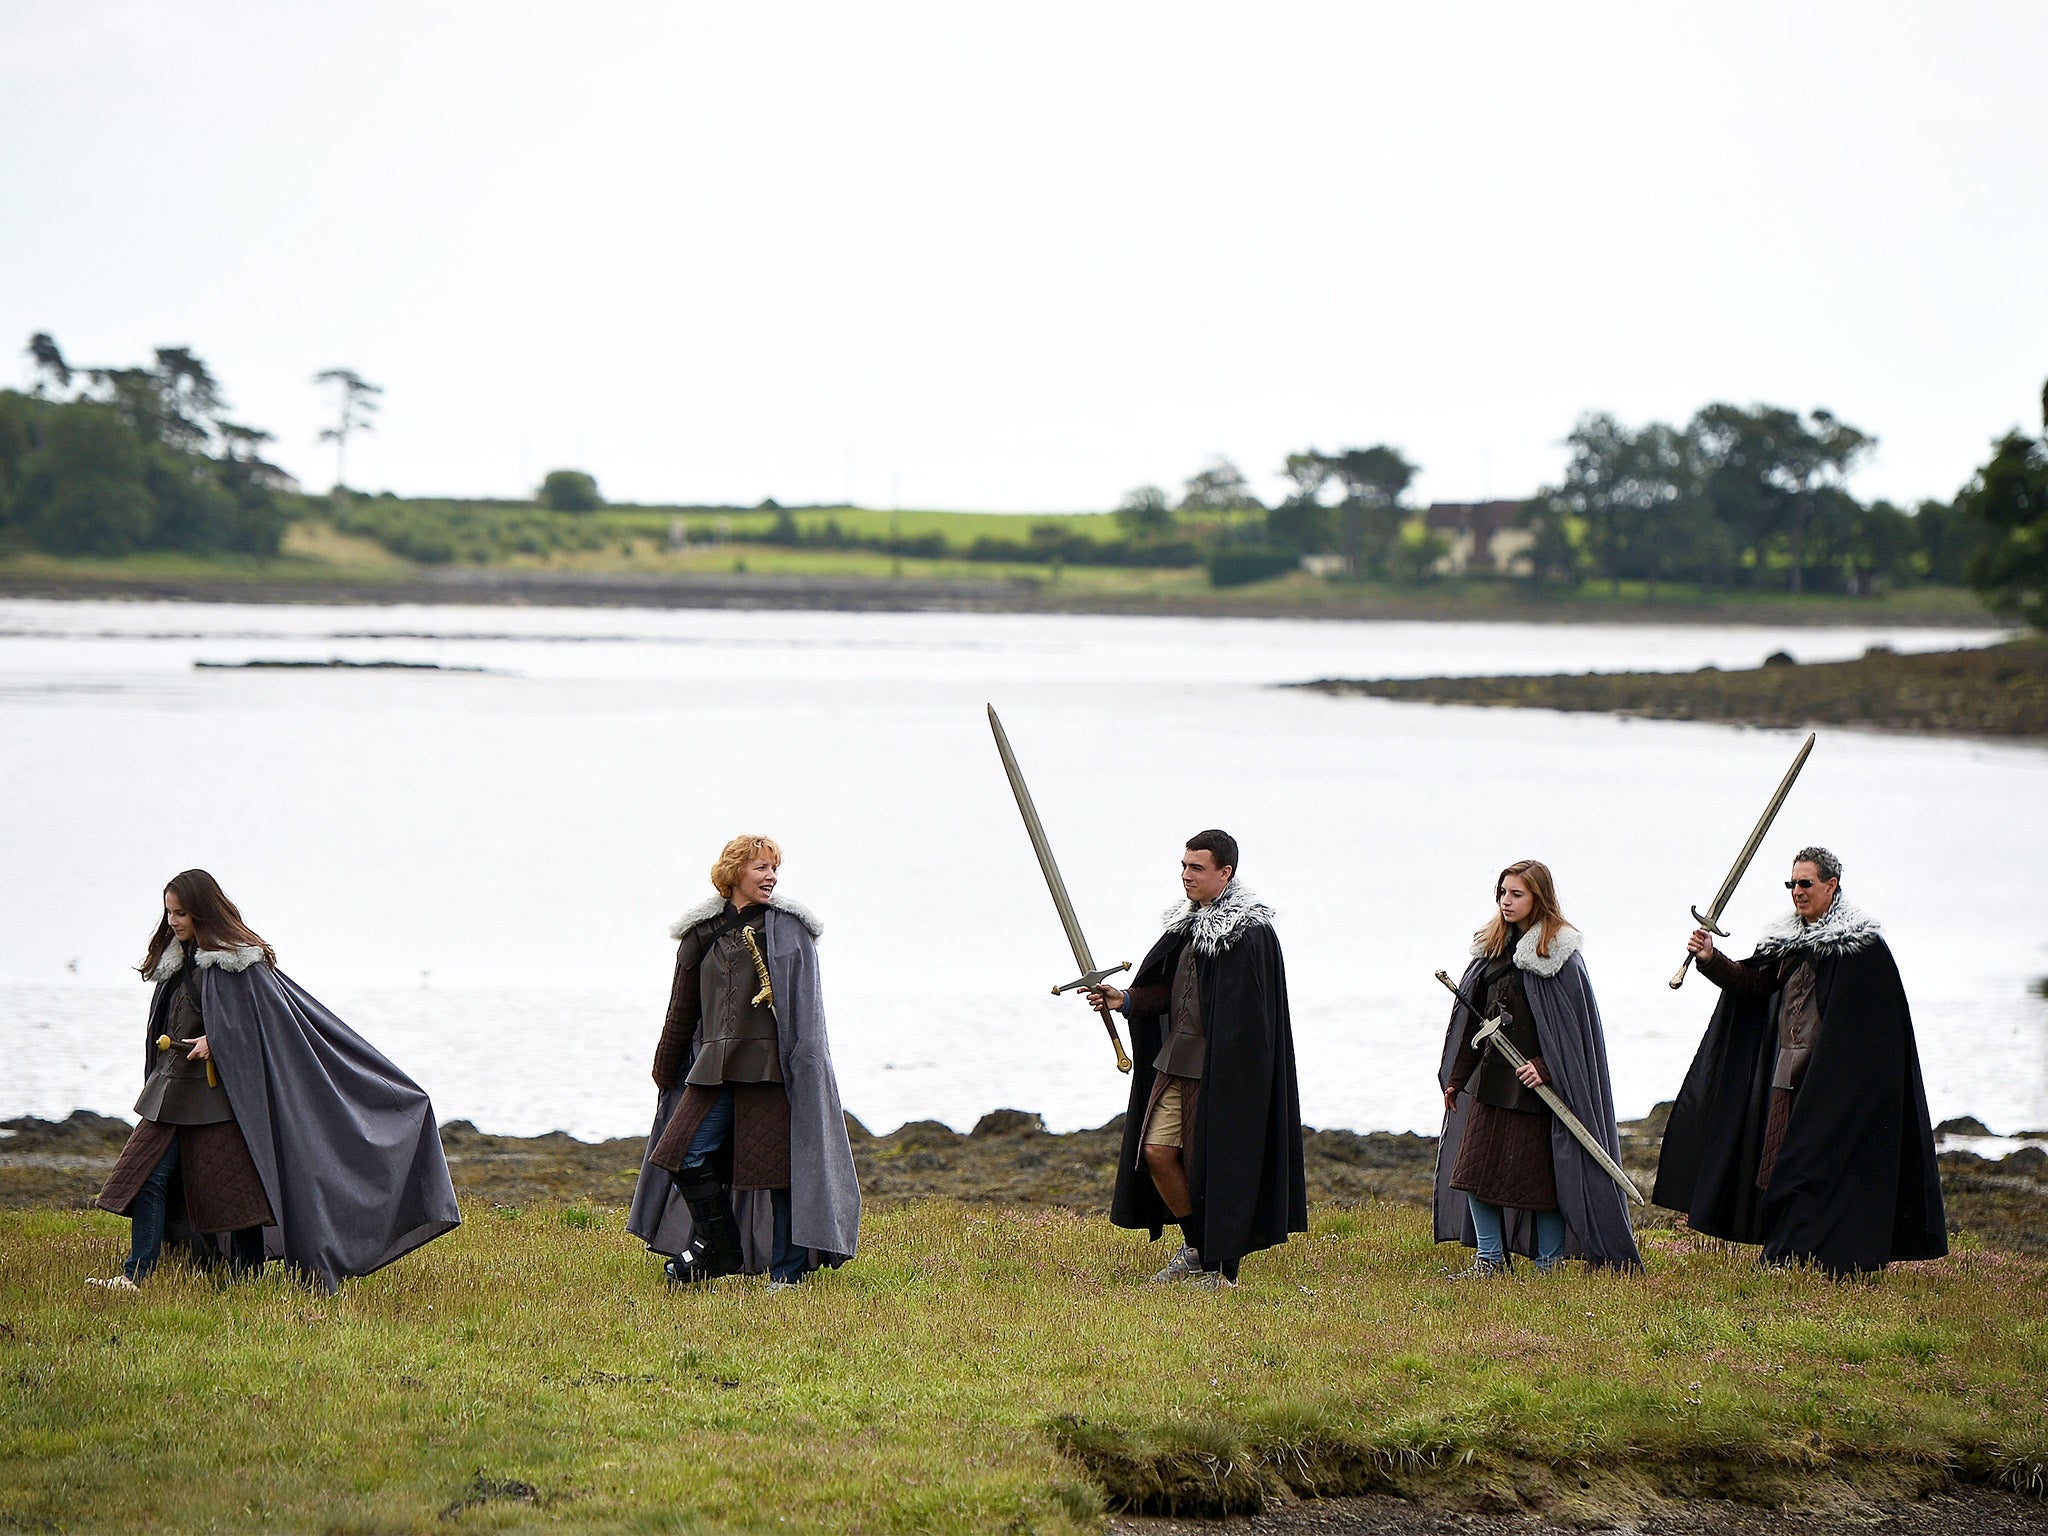 The popularity of ‘Game of Thrones’ attracts fans from around the world to Northern Ireland